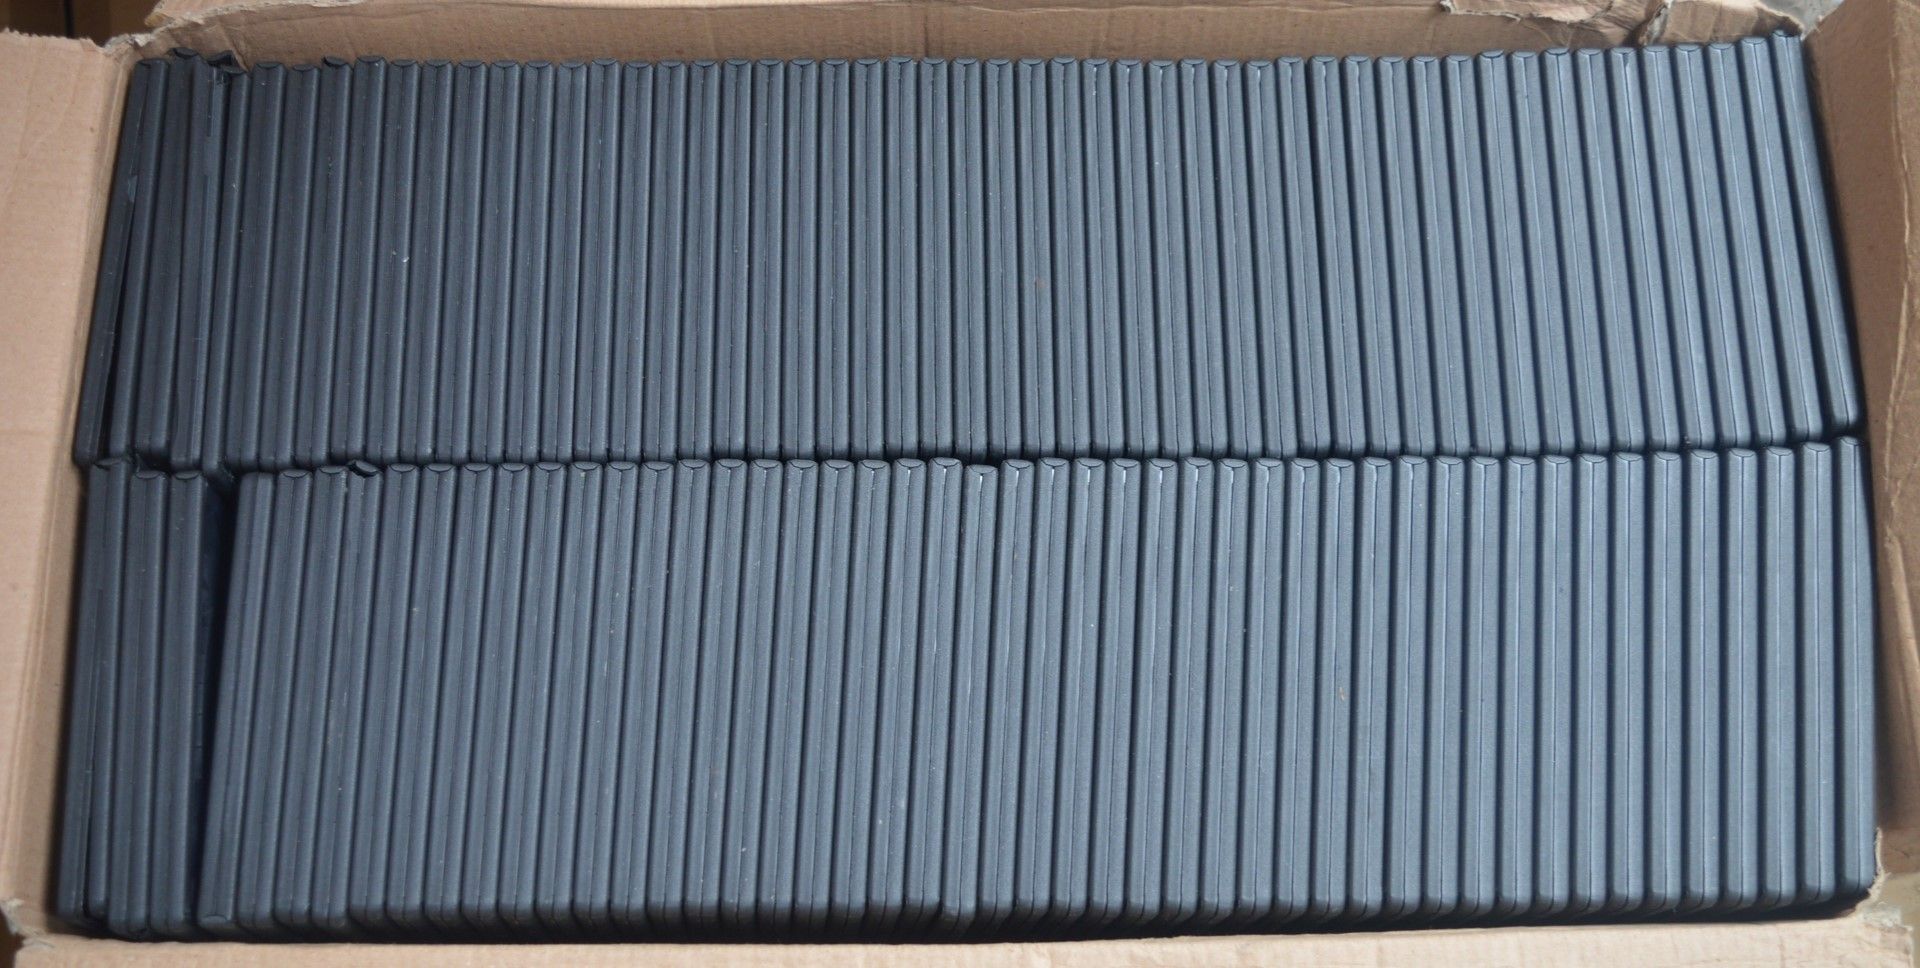 100 x Half Size Single Disc Slimline CD DVD Cases - Brand New Stock - Only 10mm Thick - CL089 - - Image 3 of 4